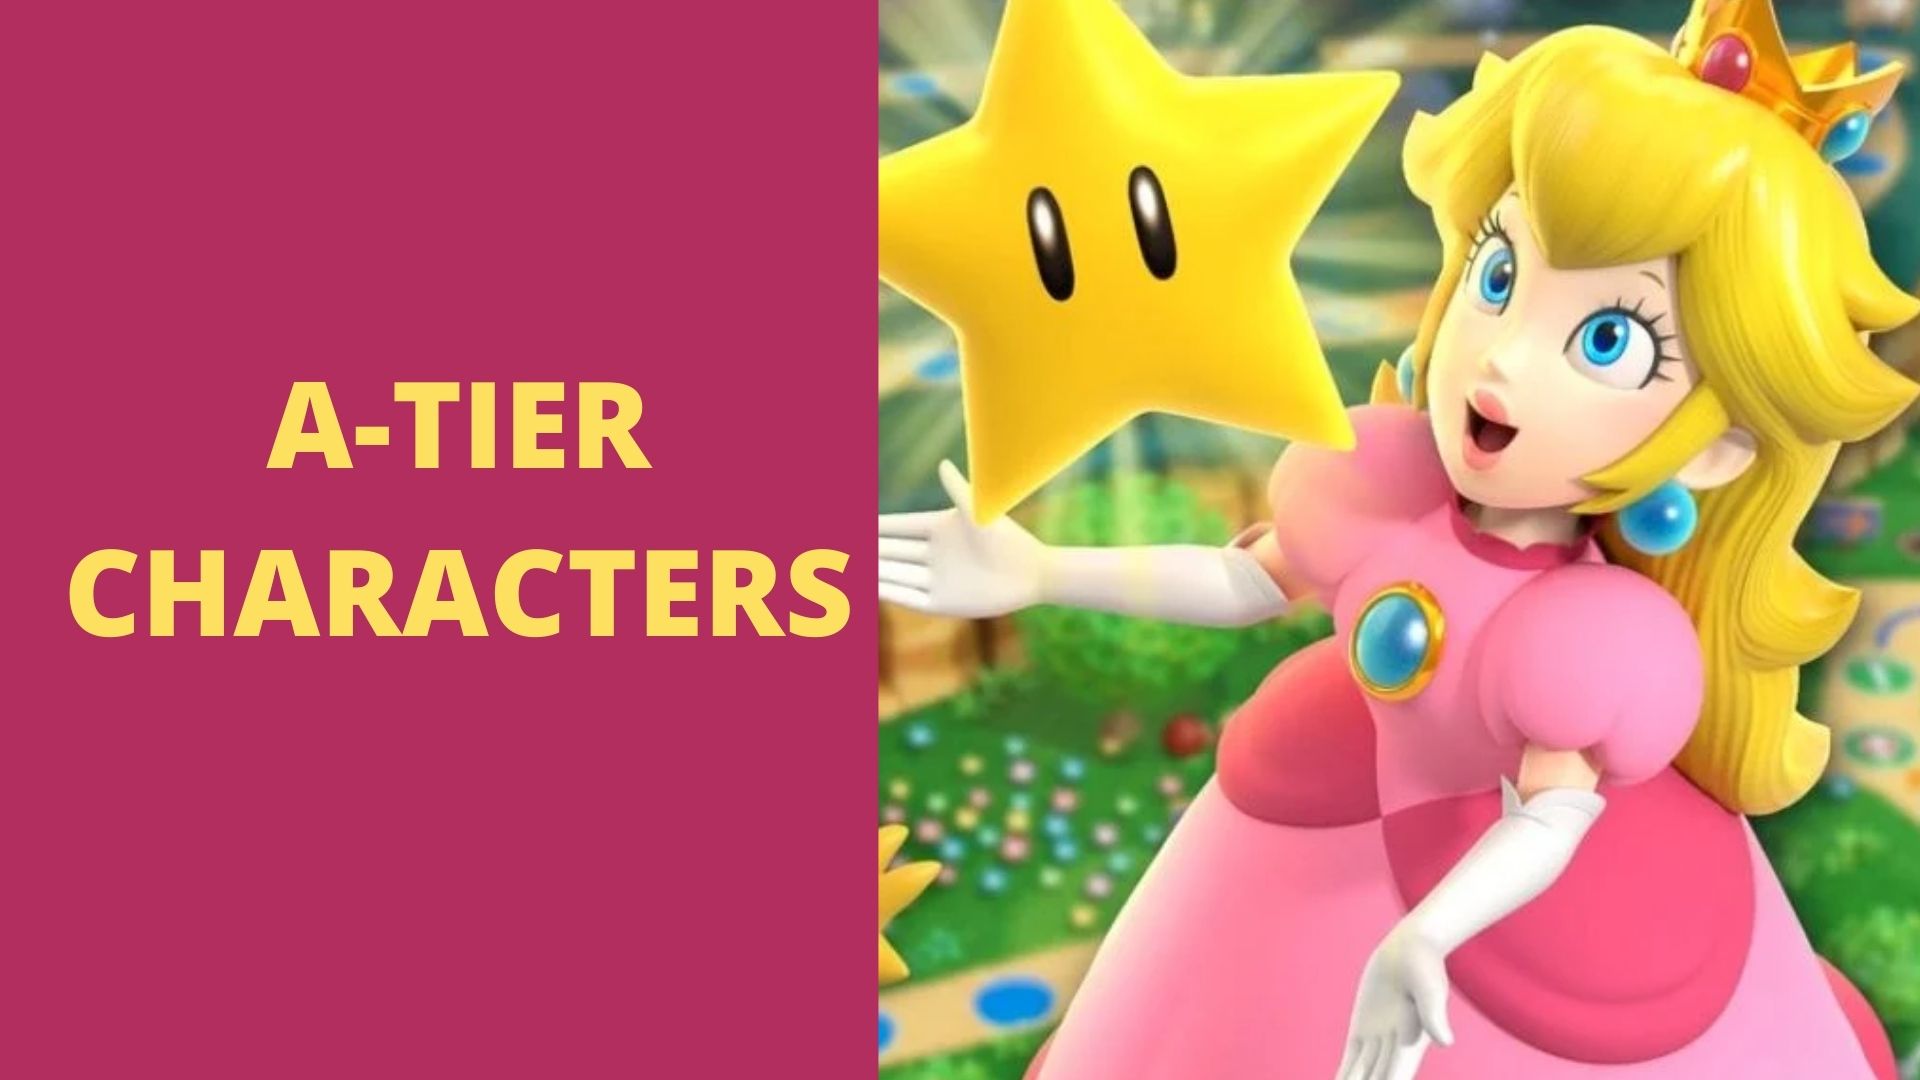 A-tier characters